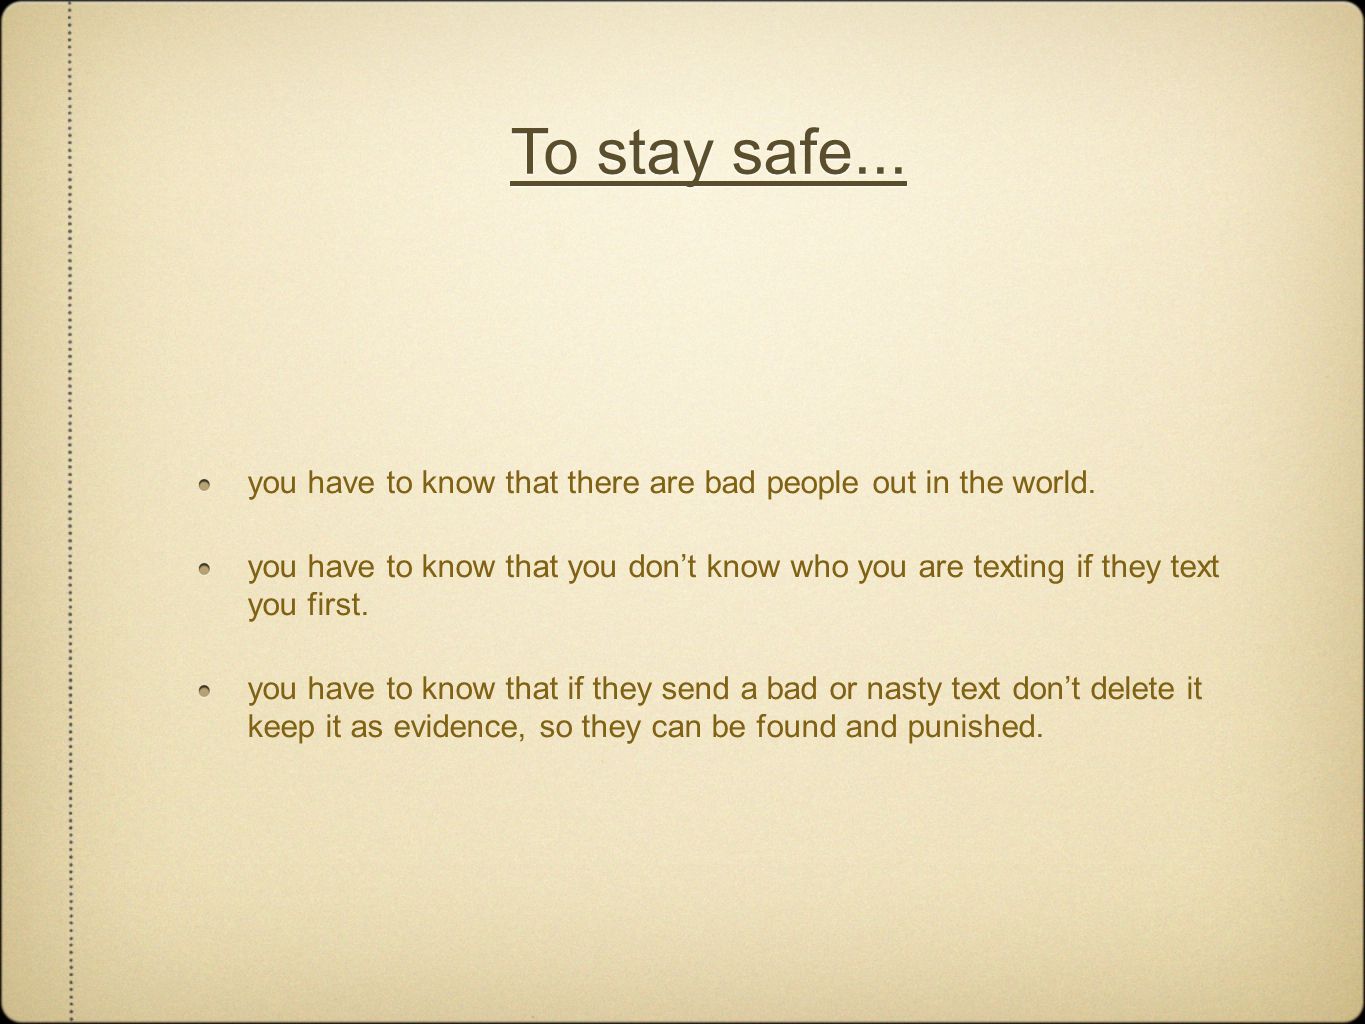 To stay safe... you have to know that there are bad people out in the world.